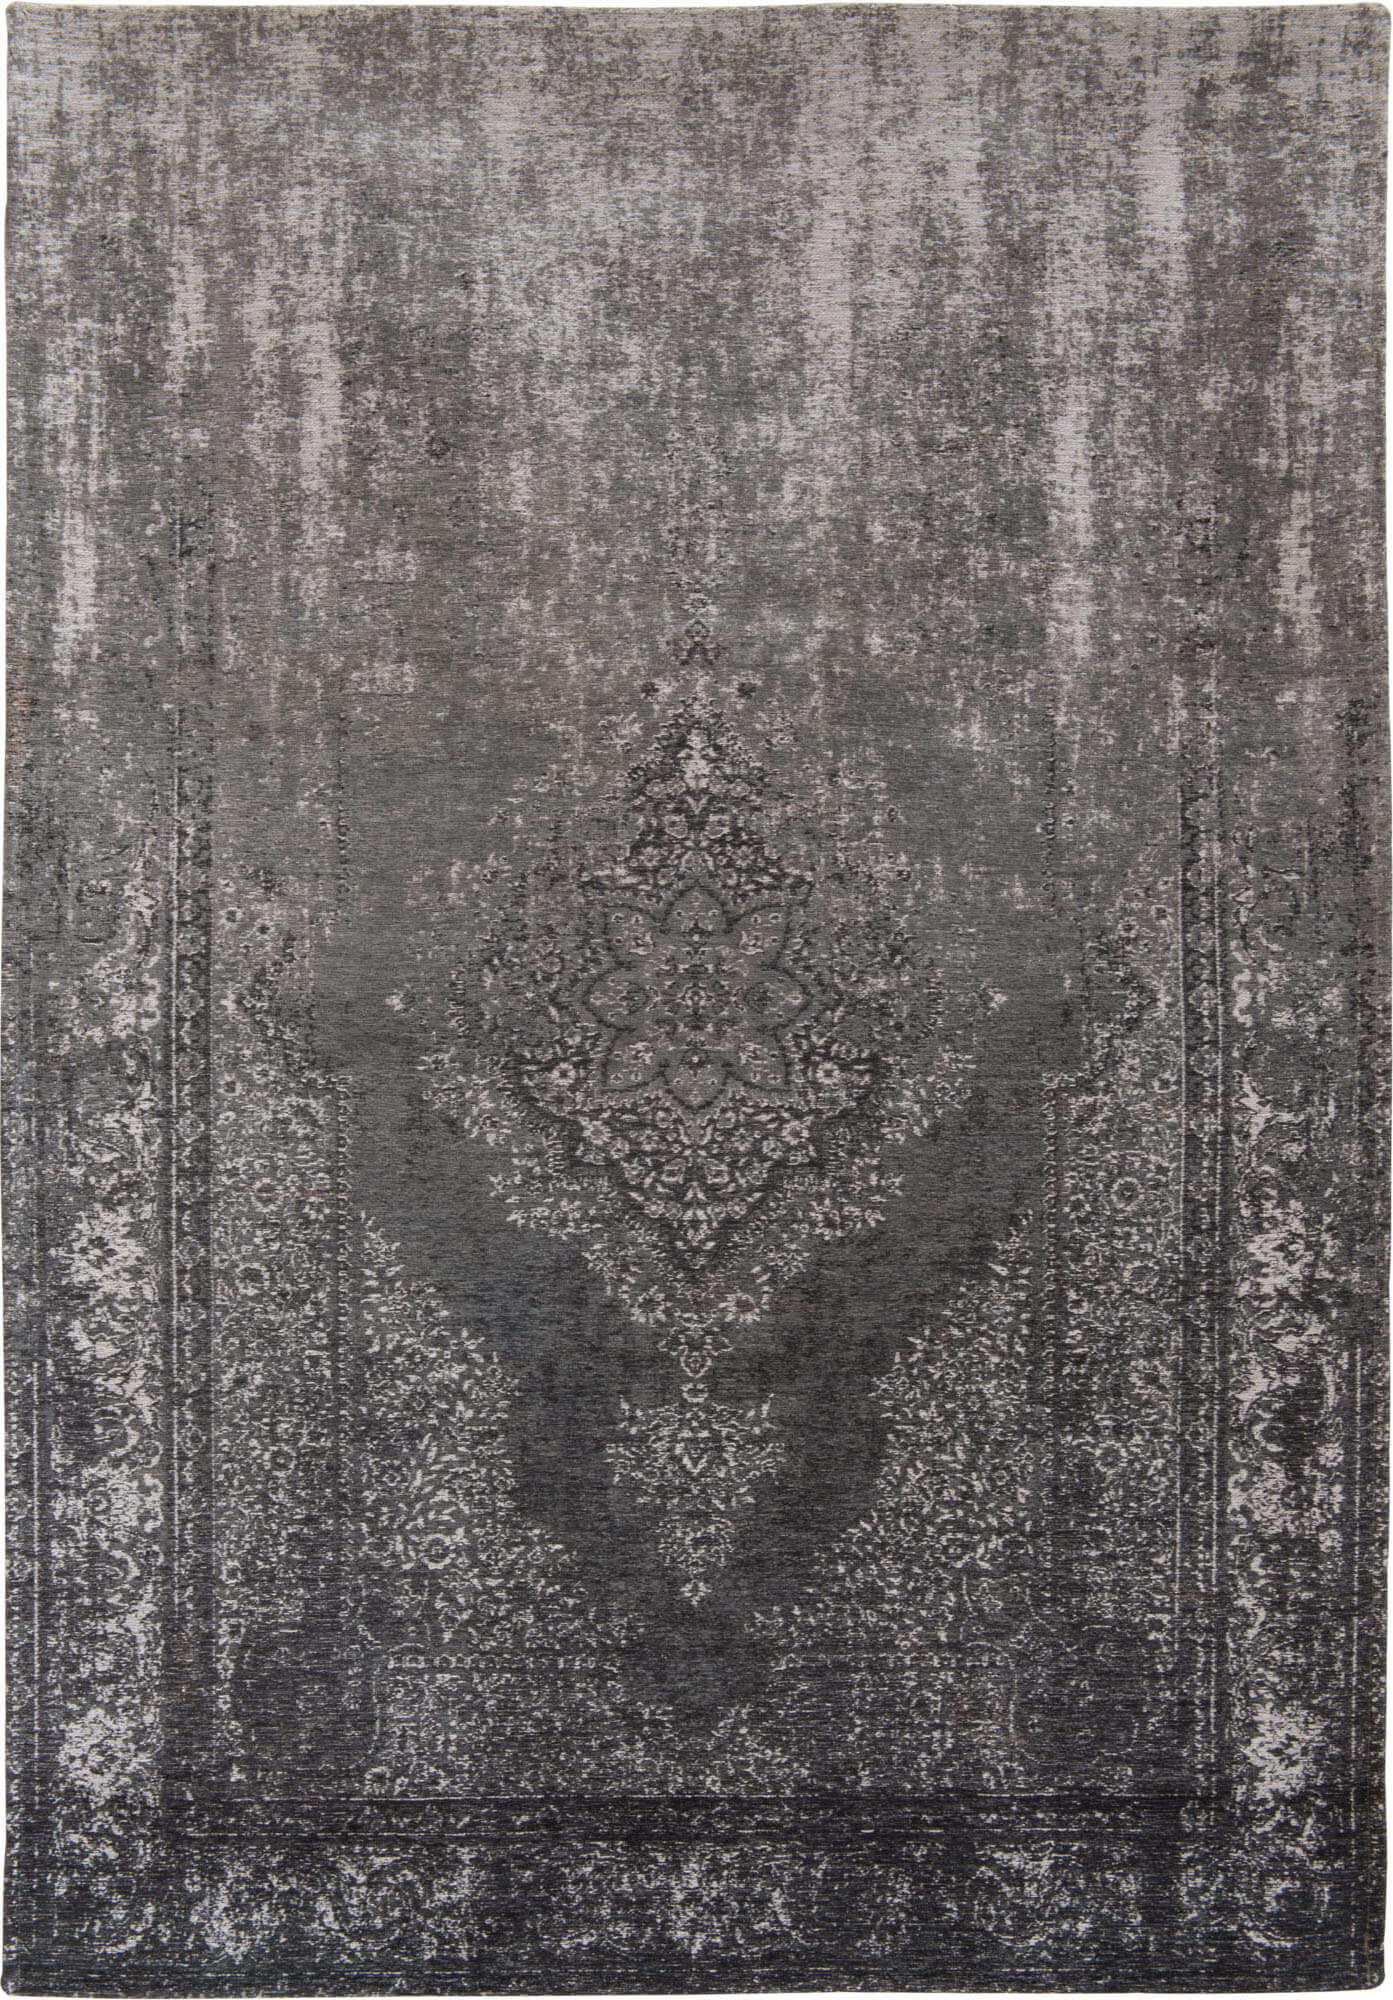 Persian Vintage Style Rug Grey Neutral ☞ Size: 200 x 280 cm